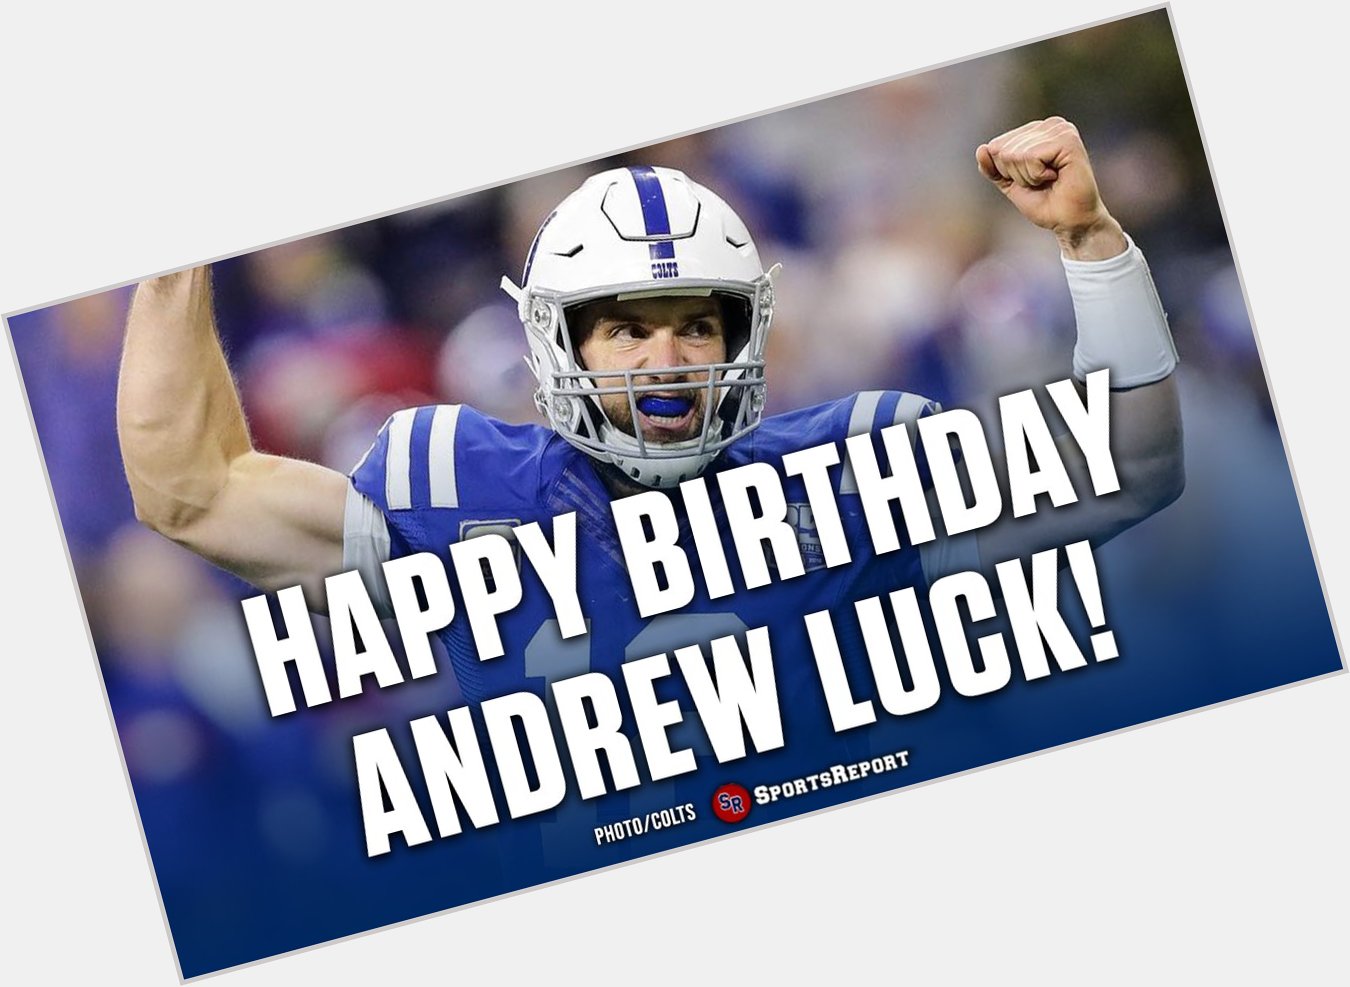  Fans, let\s wish Andrew Luck a Happy Birthday! GO COLTS!! 